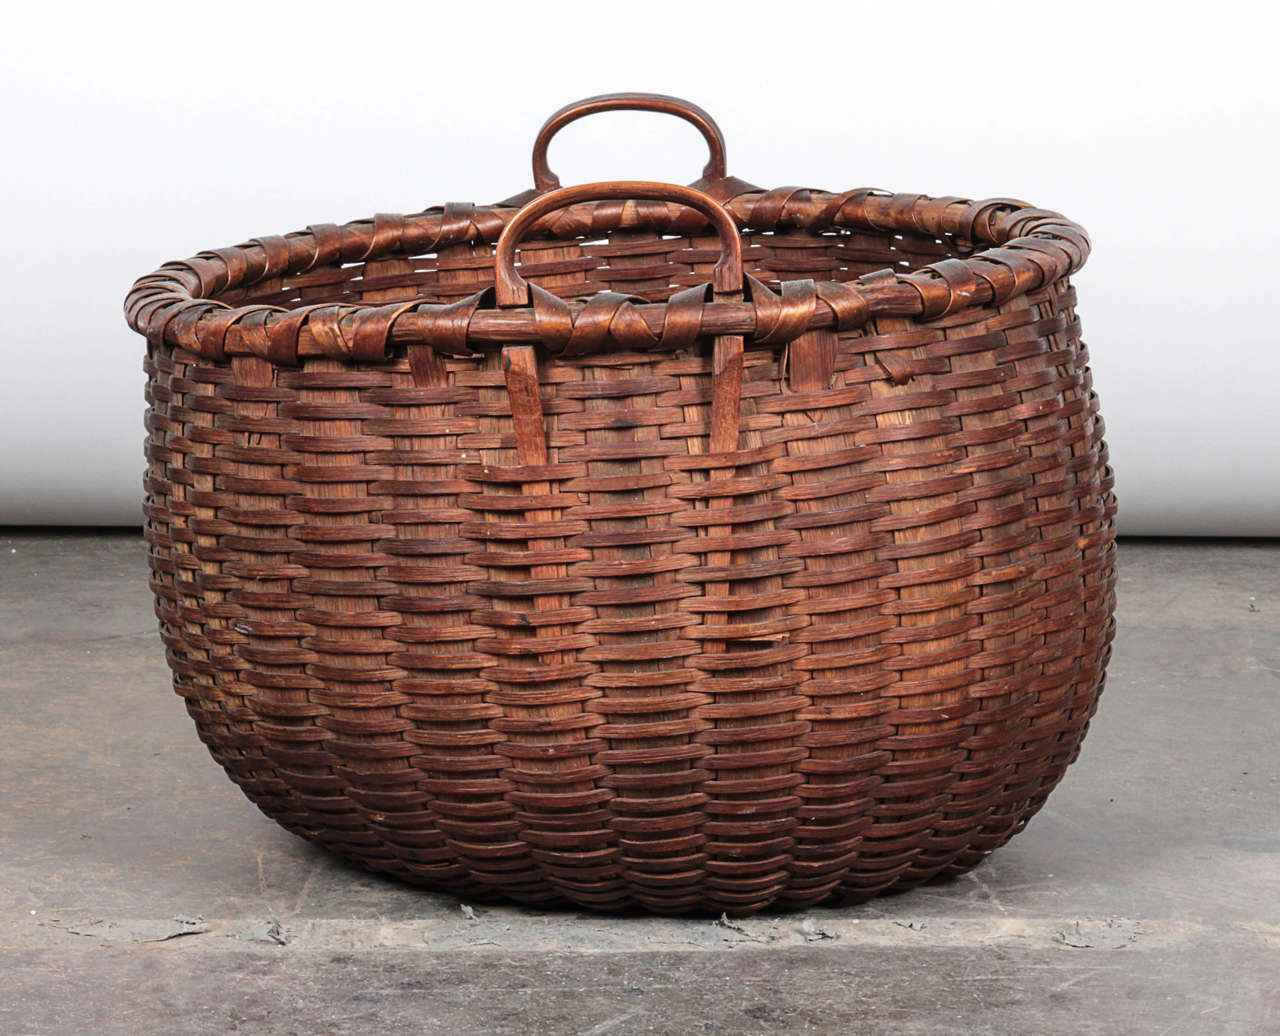 Woven basket from what appears to be black ashwood. Two small handles give ability to easily carry this fruit basket at your hip.

Not available for sale or to ship in the state of California.